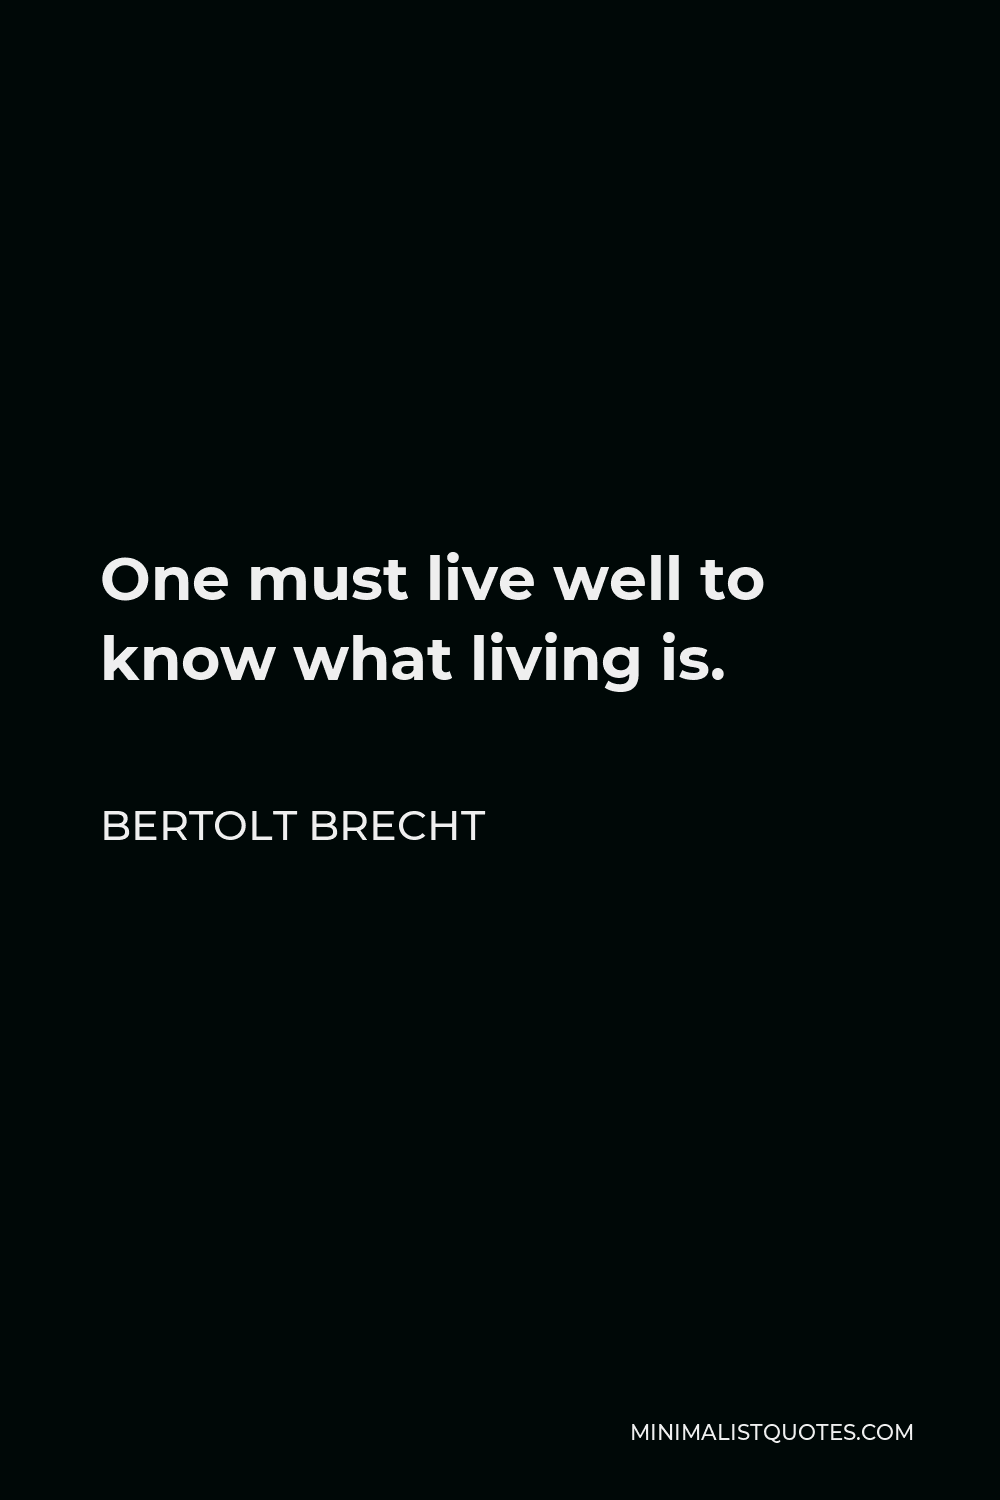 Bertolt Brecht Quote - One must live well to know what living is.